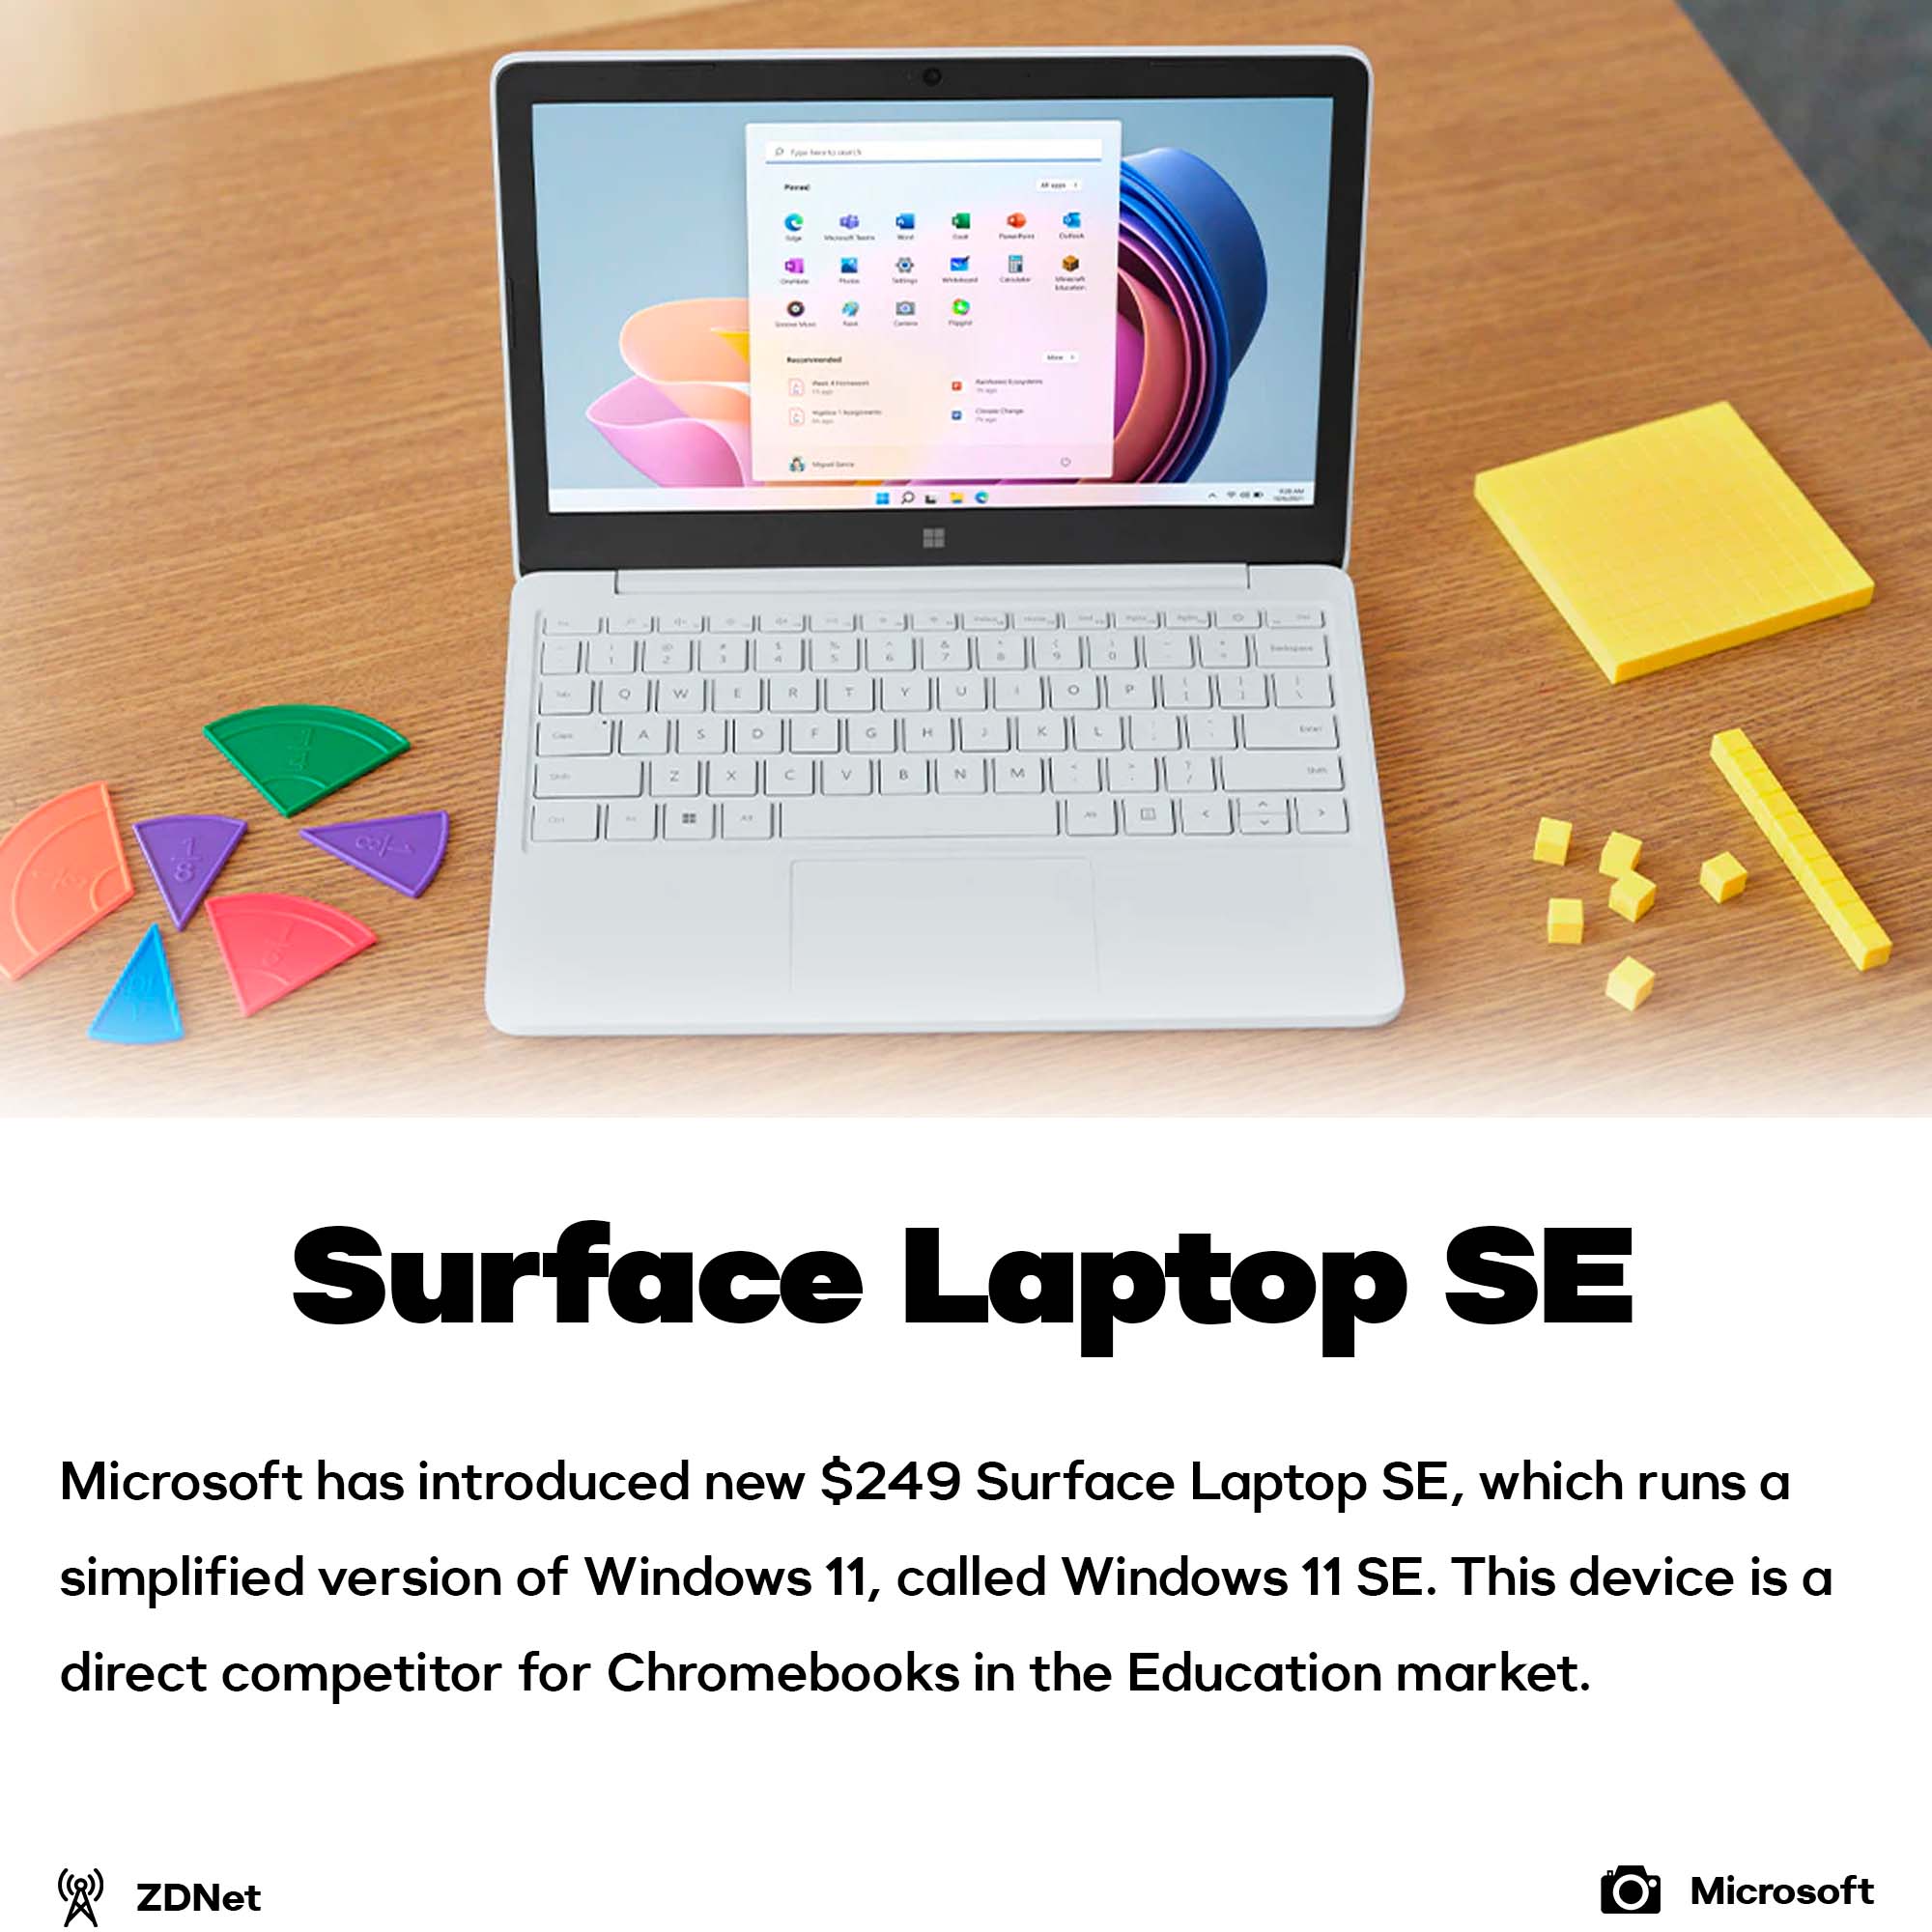 Microsoft release a new laptop for the Education